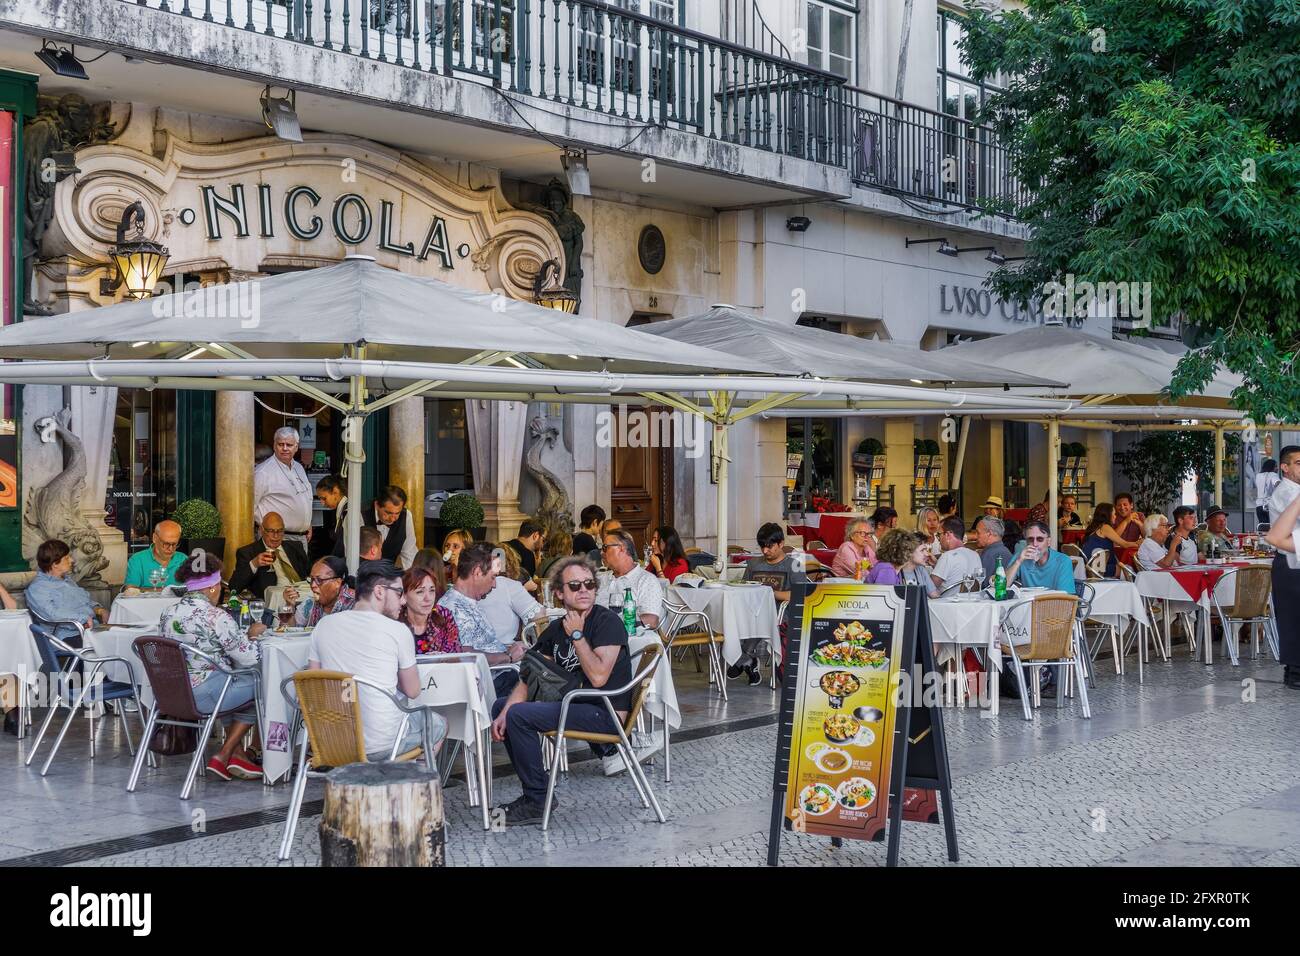 Historic Cafe Nicola entrance with art deco facade and seated customers at outdoor tables in Rossio Square, Lisbon, Portugal, Europe Stock Photo